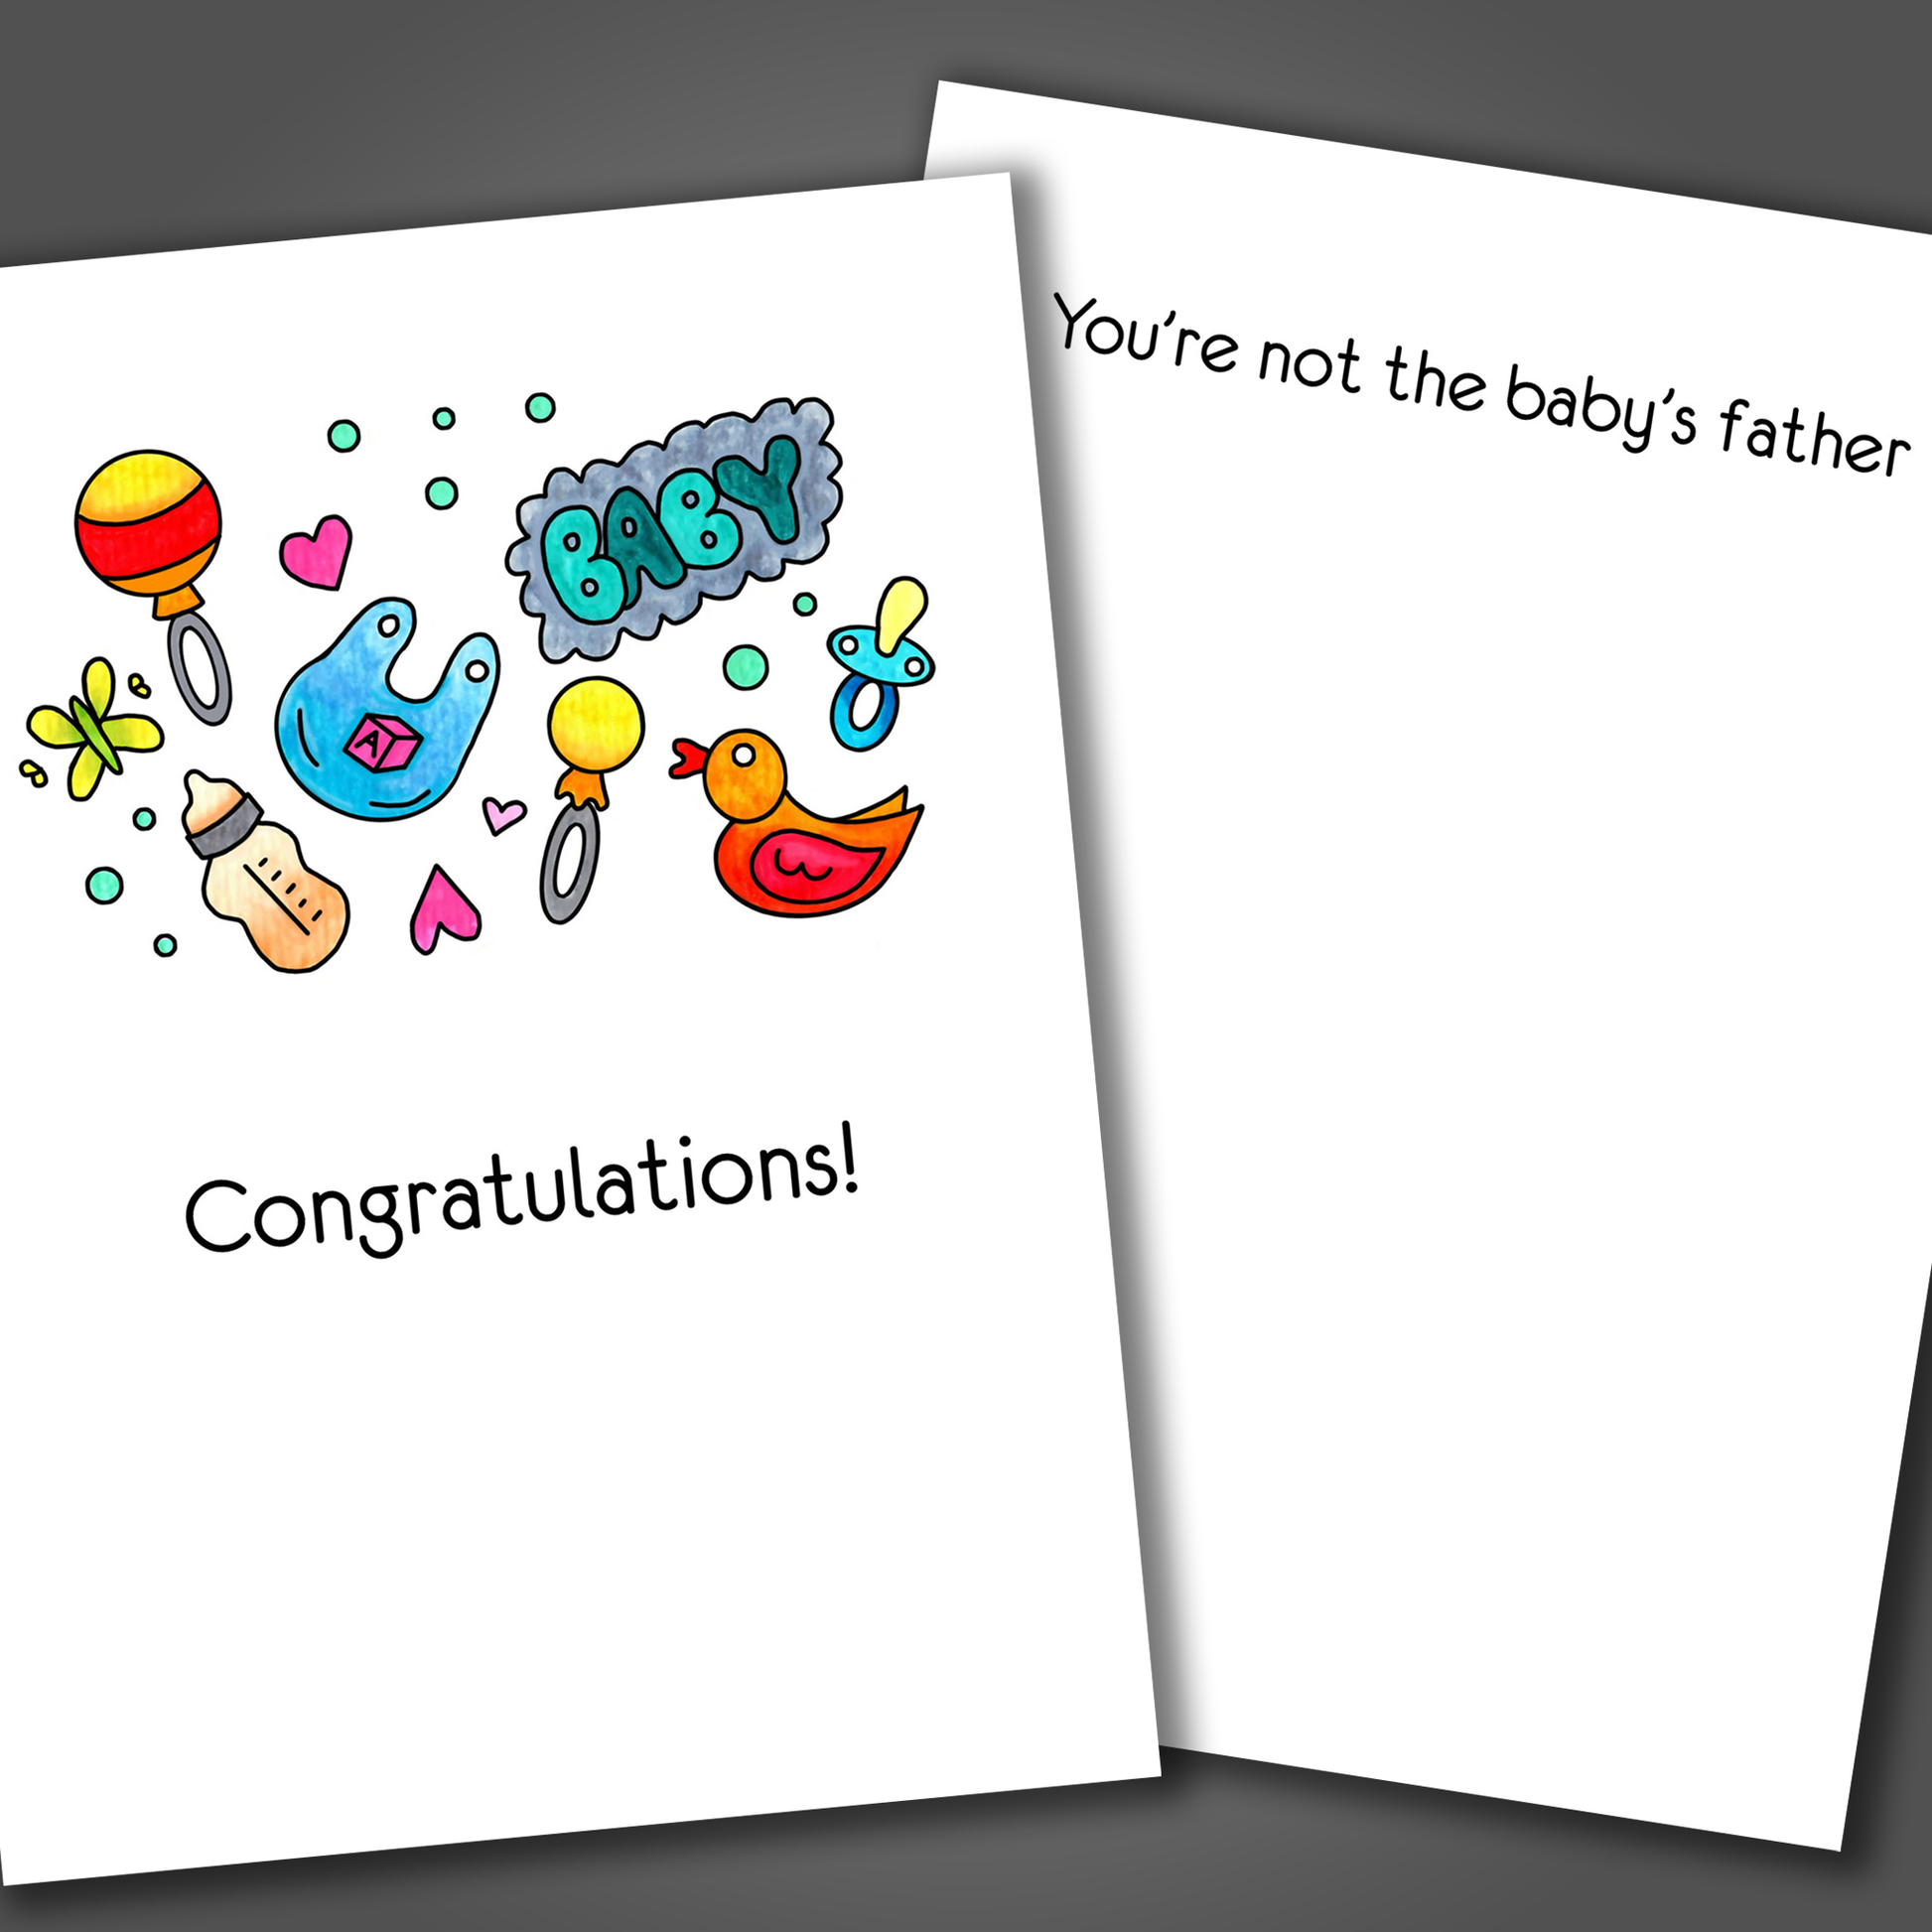 Funny new baby or funny adoption congratulations card with baby toys drawn on front of card. Inside the card is a funny joke that says you are not the father.